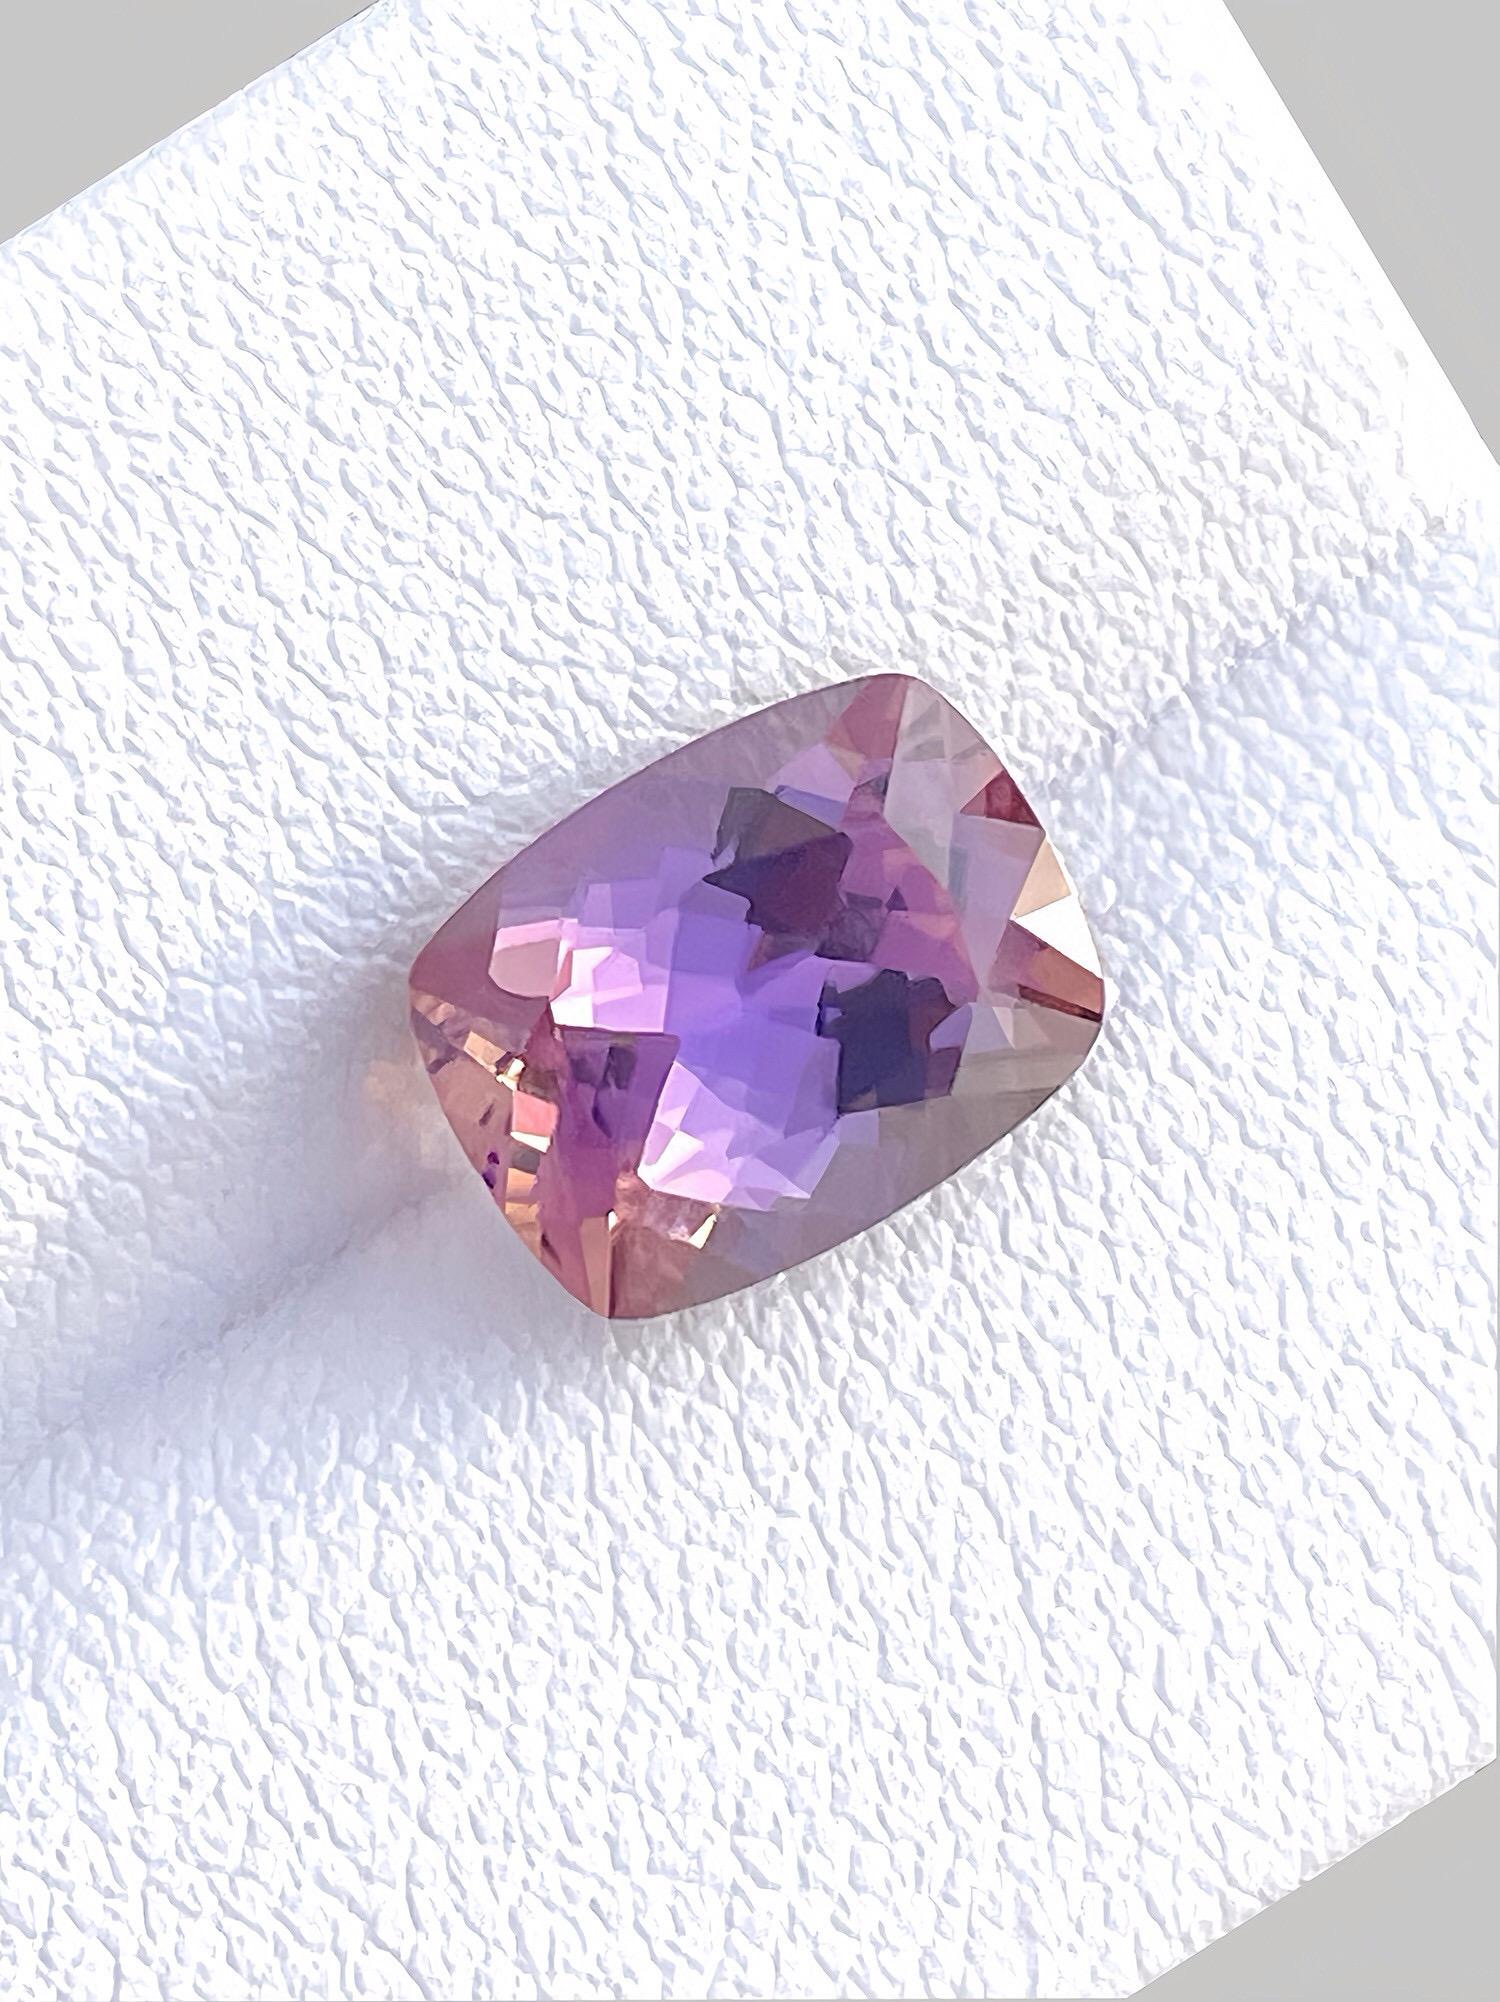 Name: pink tanzanite unheated / zoisite 
Weight: 3.17 carat 
Color: pink 
Origin: Tanzania 
Size: 10.2*7.8*5.4mm
Clarity: loop clean 100%
Cutting: design and precision cutting by WB gems
Brand: WB selected gems 

Pink tanzanite is Top collection for